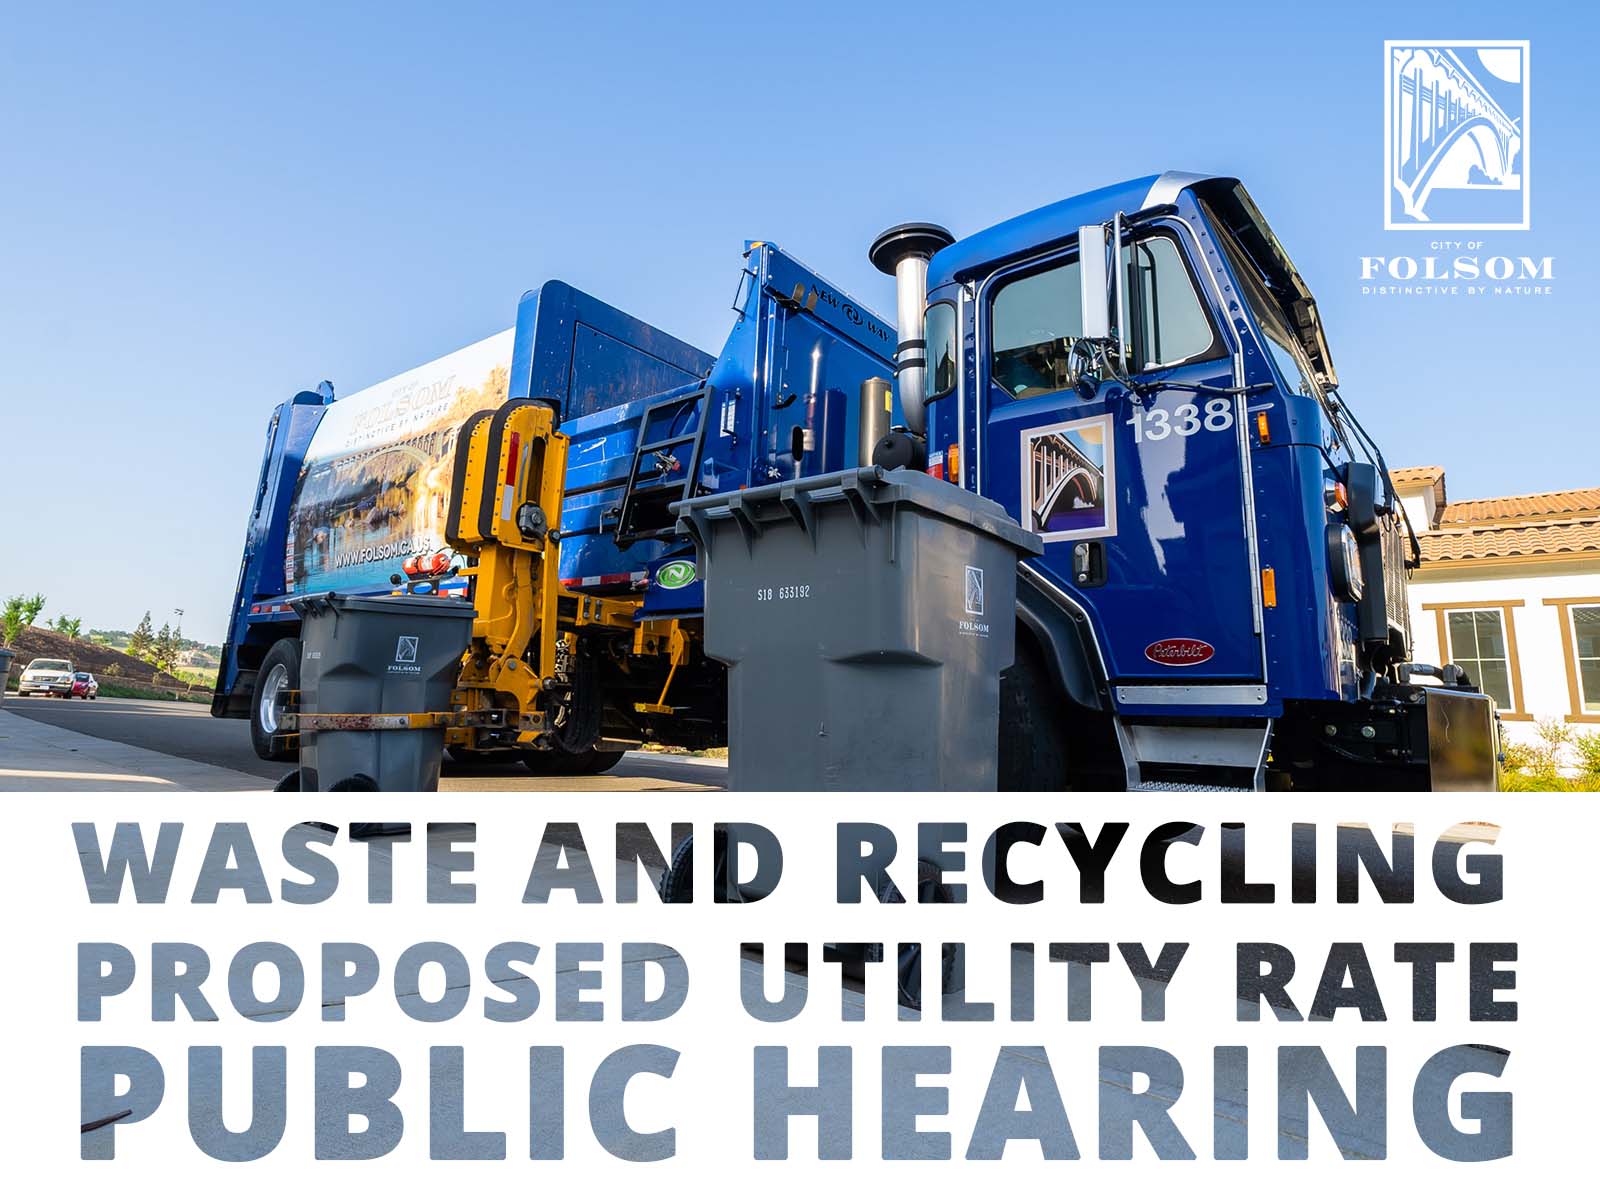 Solid Waste Utility Rate Study Public hearing graphic of a picture of a refuse truck with its arm grabbing a trash can, a white text box at the bottom, and a white stacked city of folsom logo in the top right logo